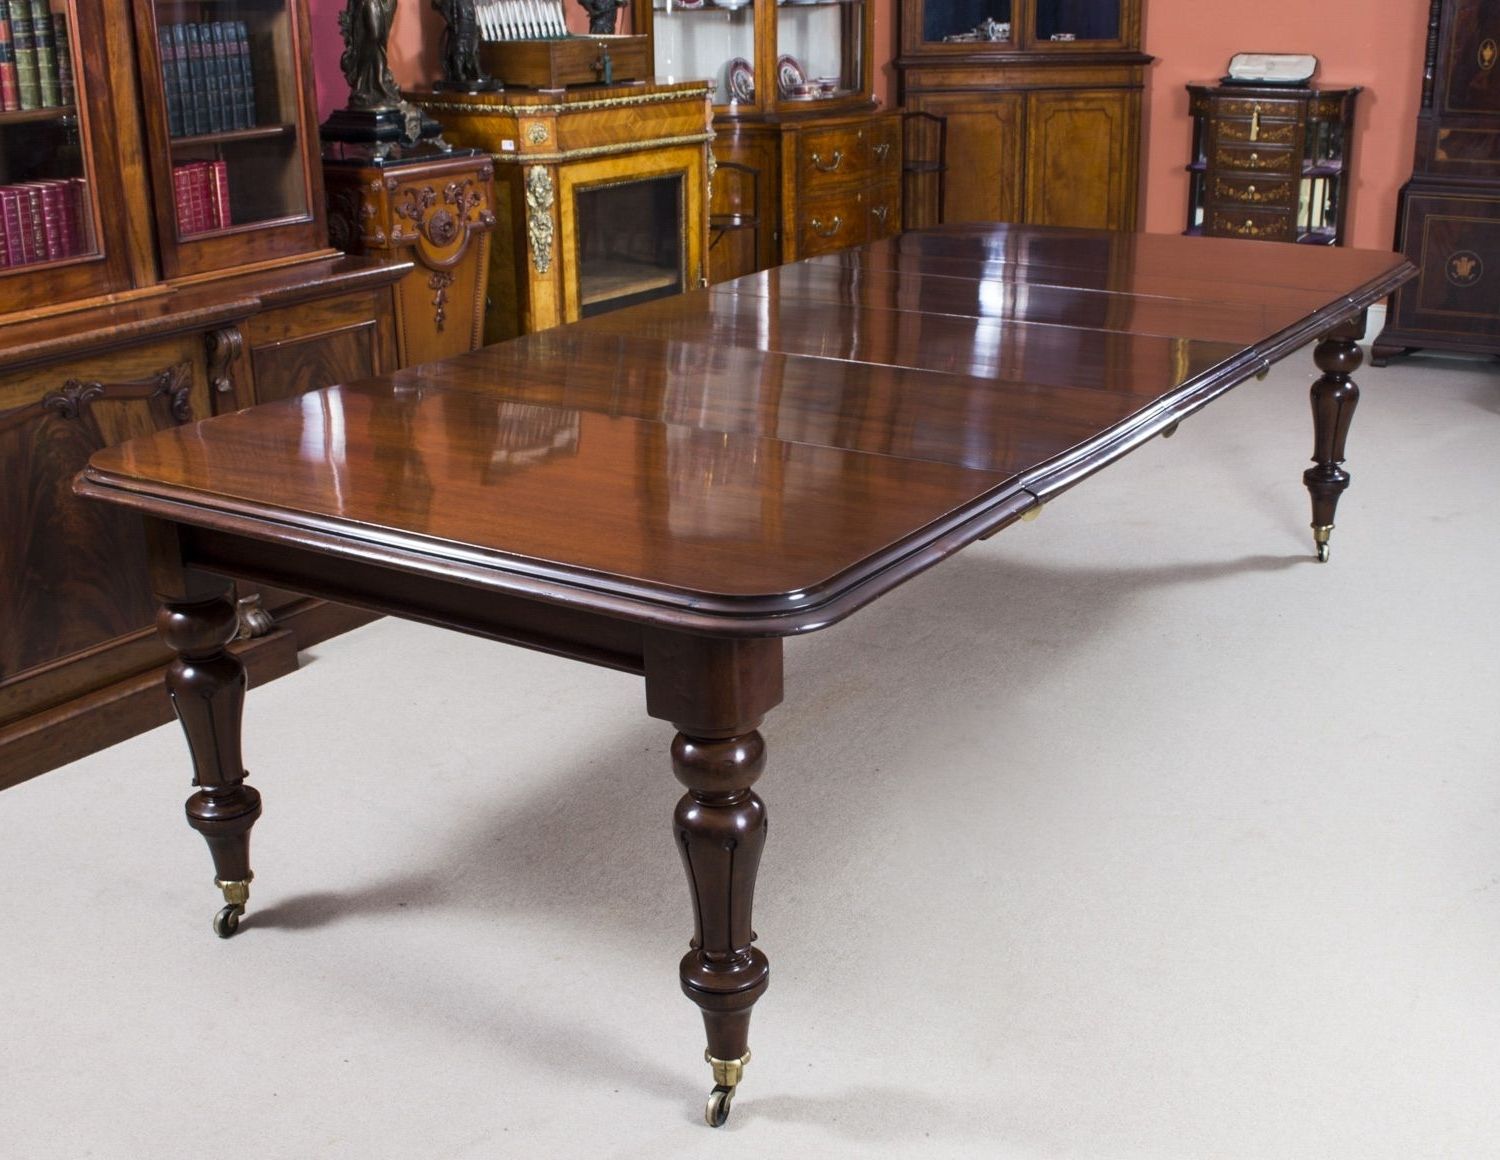 Preferred Entertain In Style With This Beautiful Antique William Iv Mahogany Within Mahogany Dining Tables And 4 Chairs (View 13 of 25)